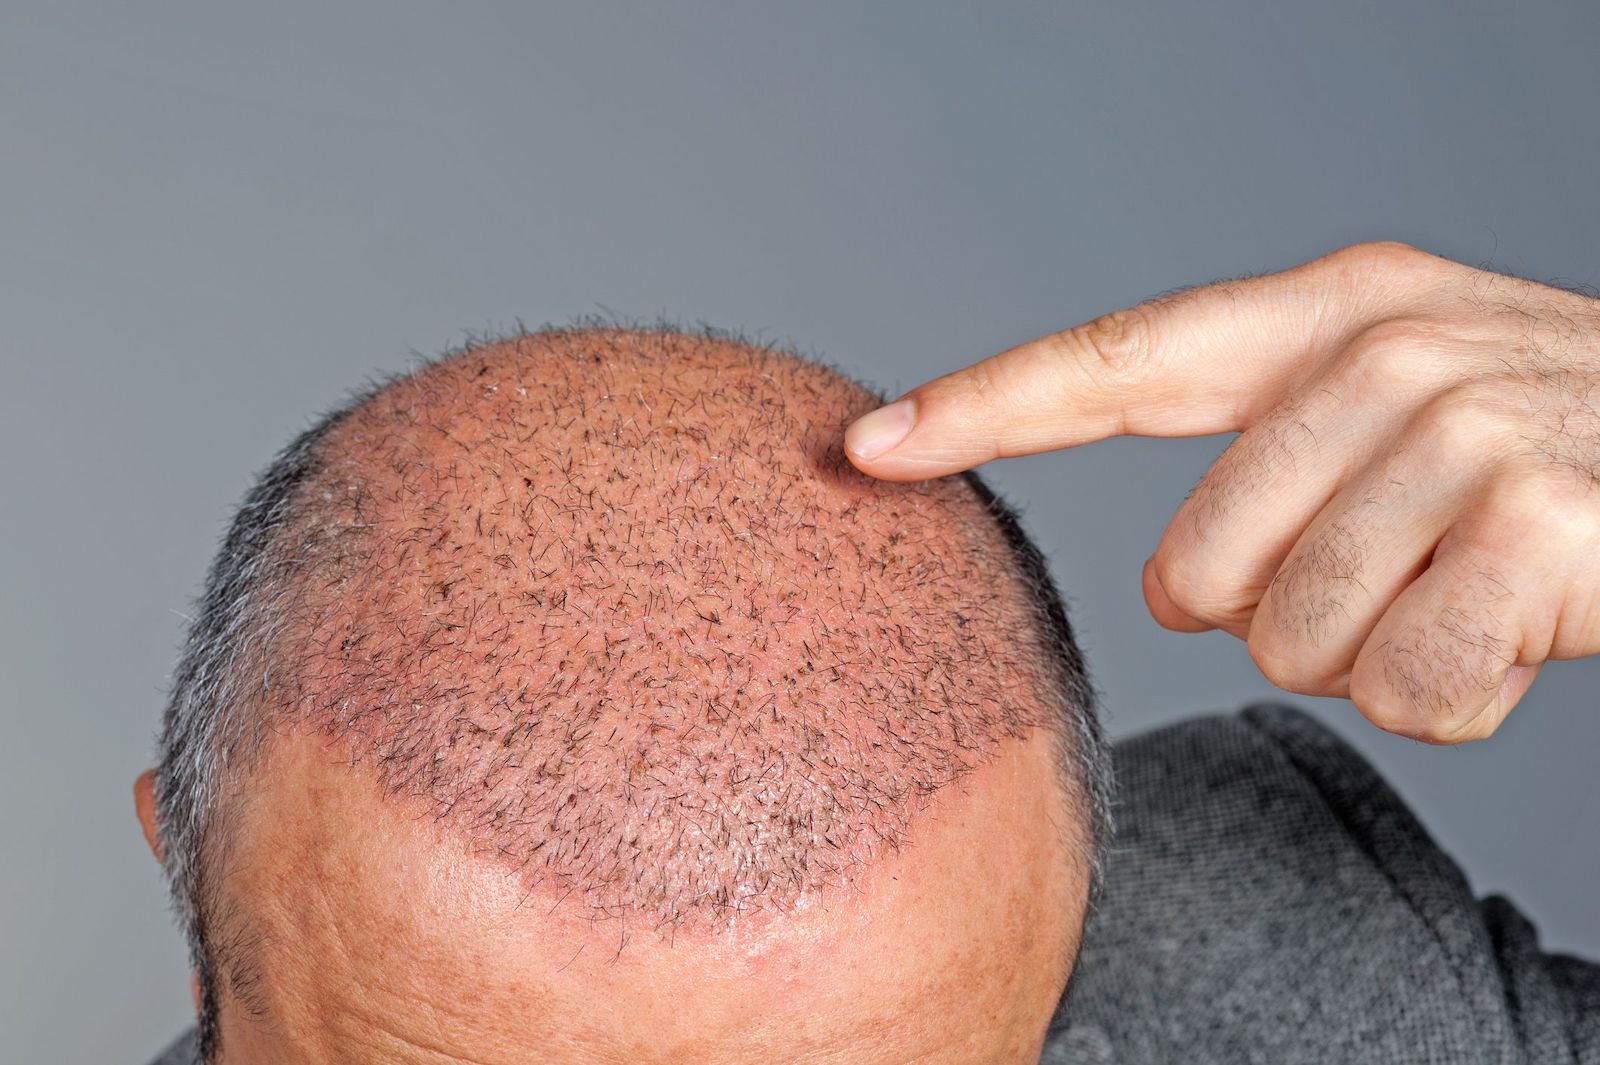 Top 7 Hair Transplant Clinics in Istanbul (in 2019) by  afroamericanhairtransplant - Issuu